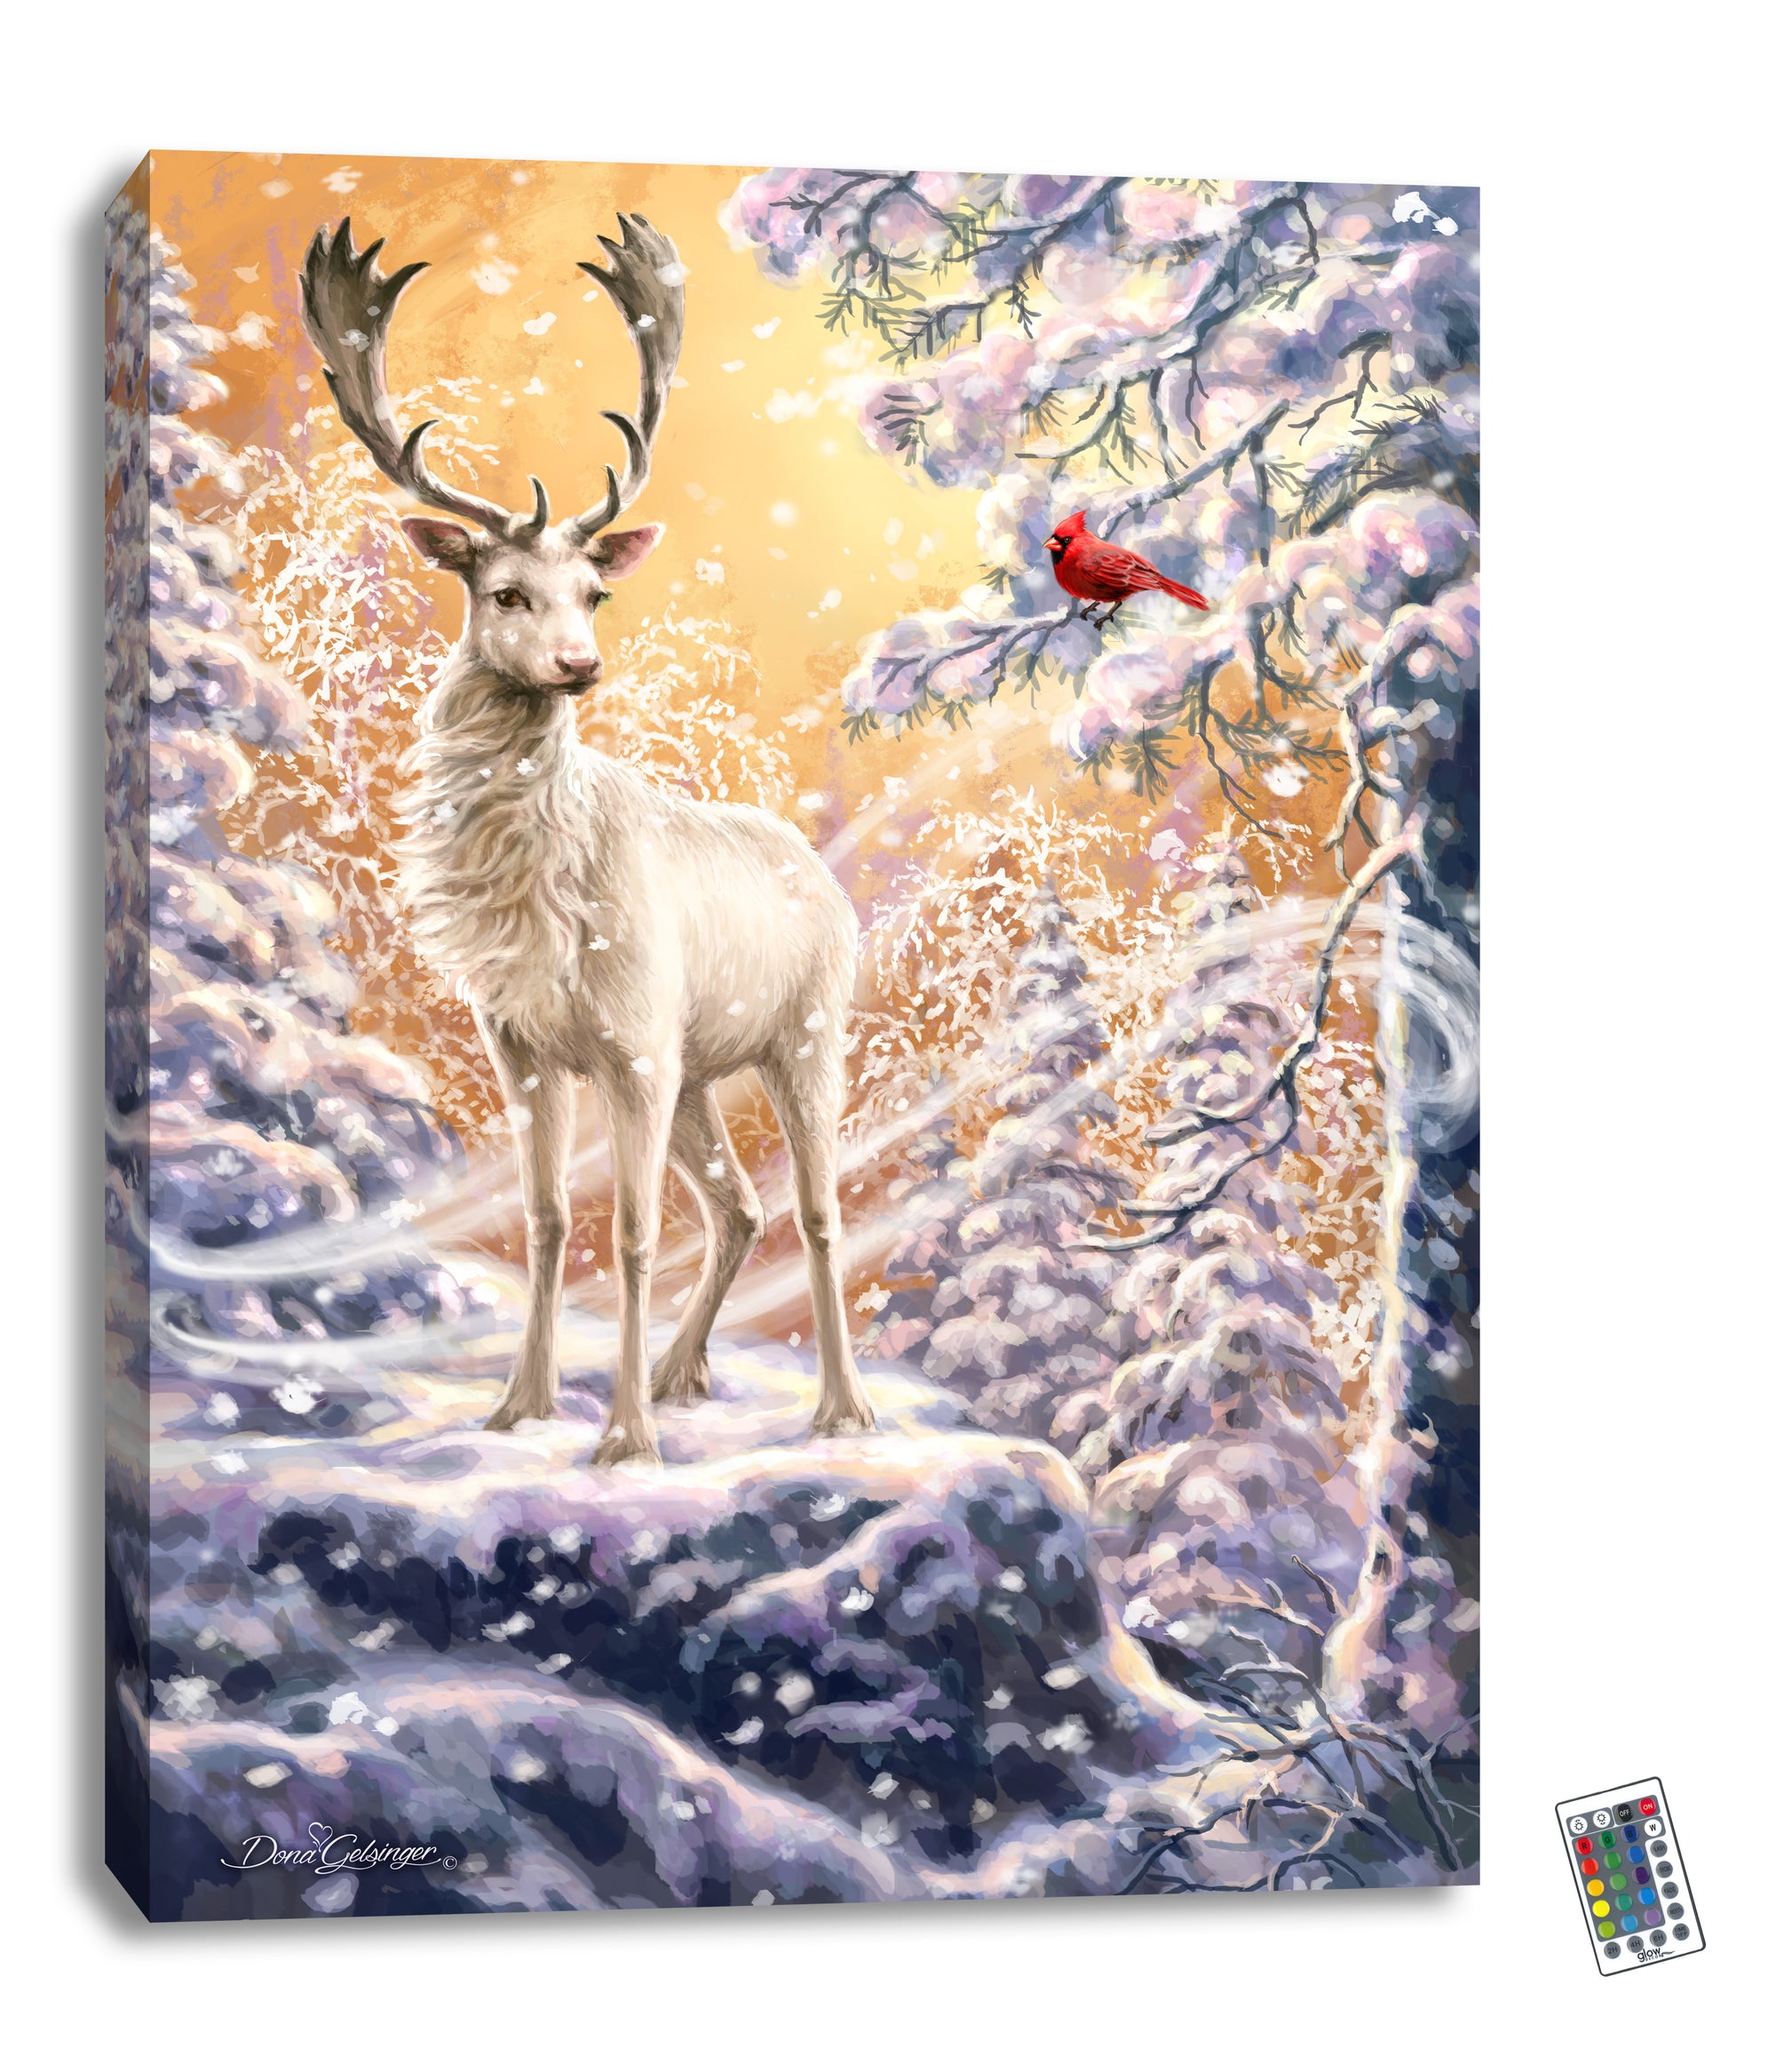 This exquisite piece showcases a majestic white reindeer, standing proud and tall amidst a picturesque snow-covered landscape.  The beauty of this piece is further enhanced by the presence of a vibrant red cardinal perched in a nearby tree.